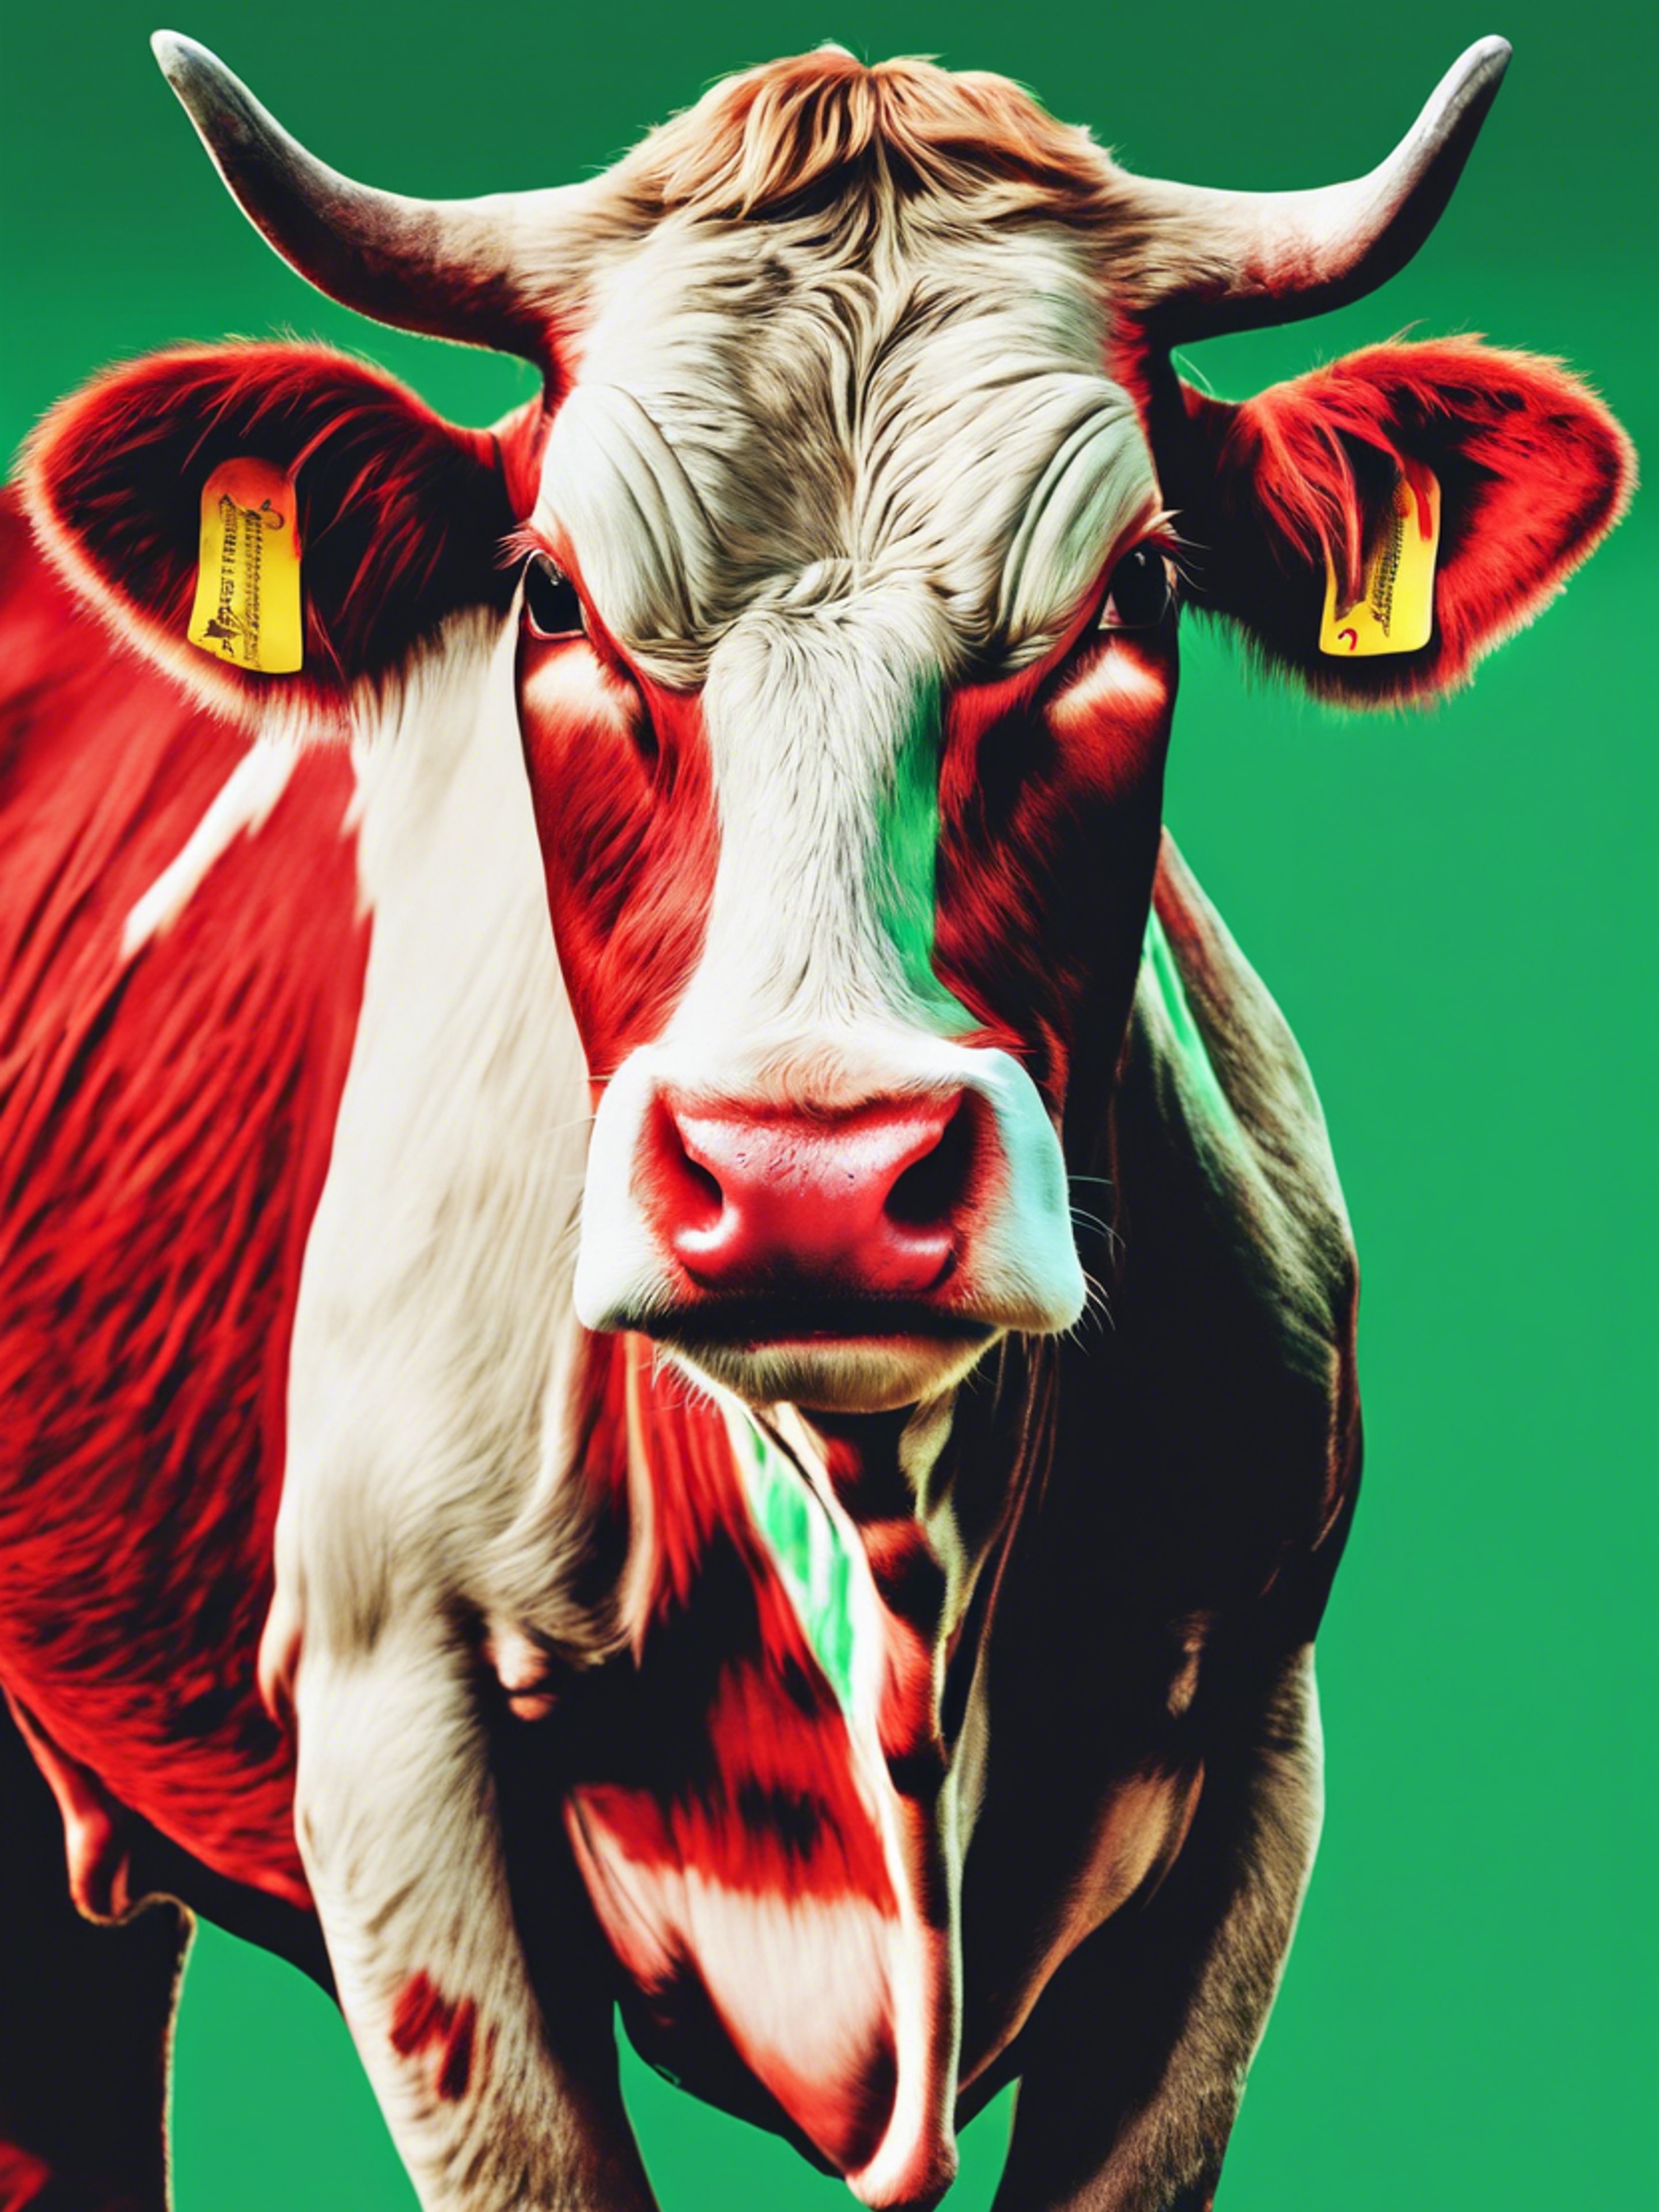 Pop-art style cow print in a palette of red and green. Wallpaper[5b65906f2b9649418c8c]